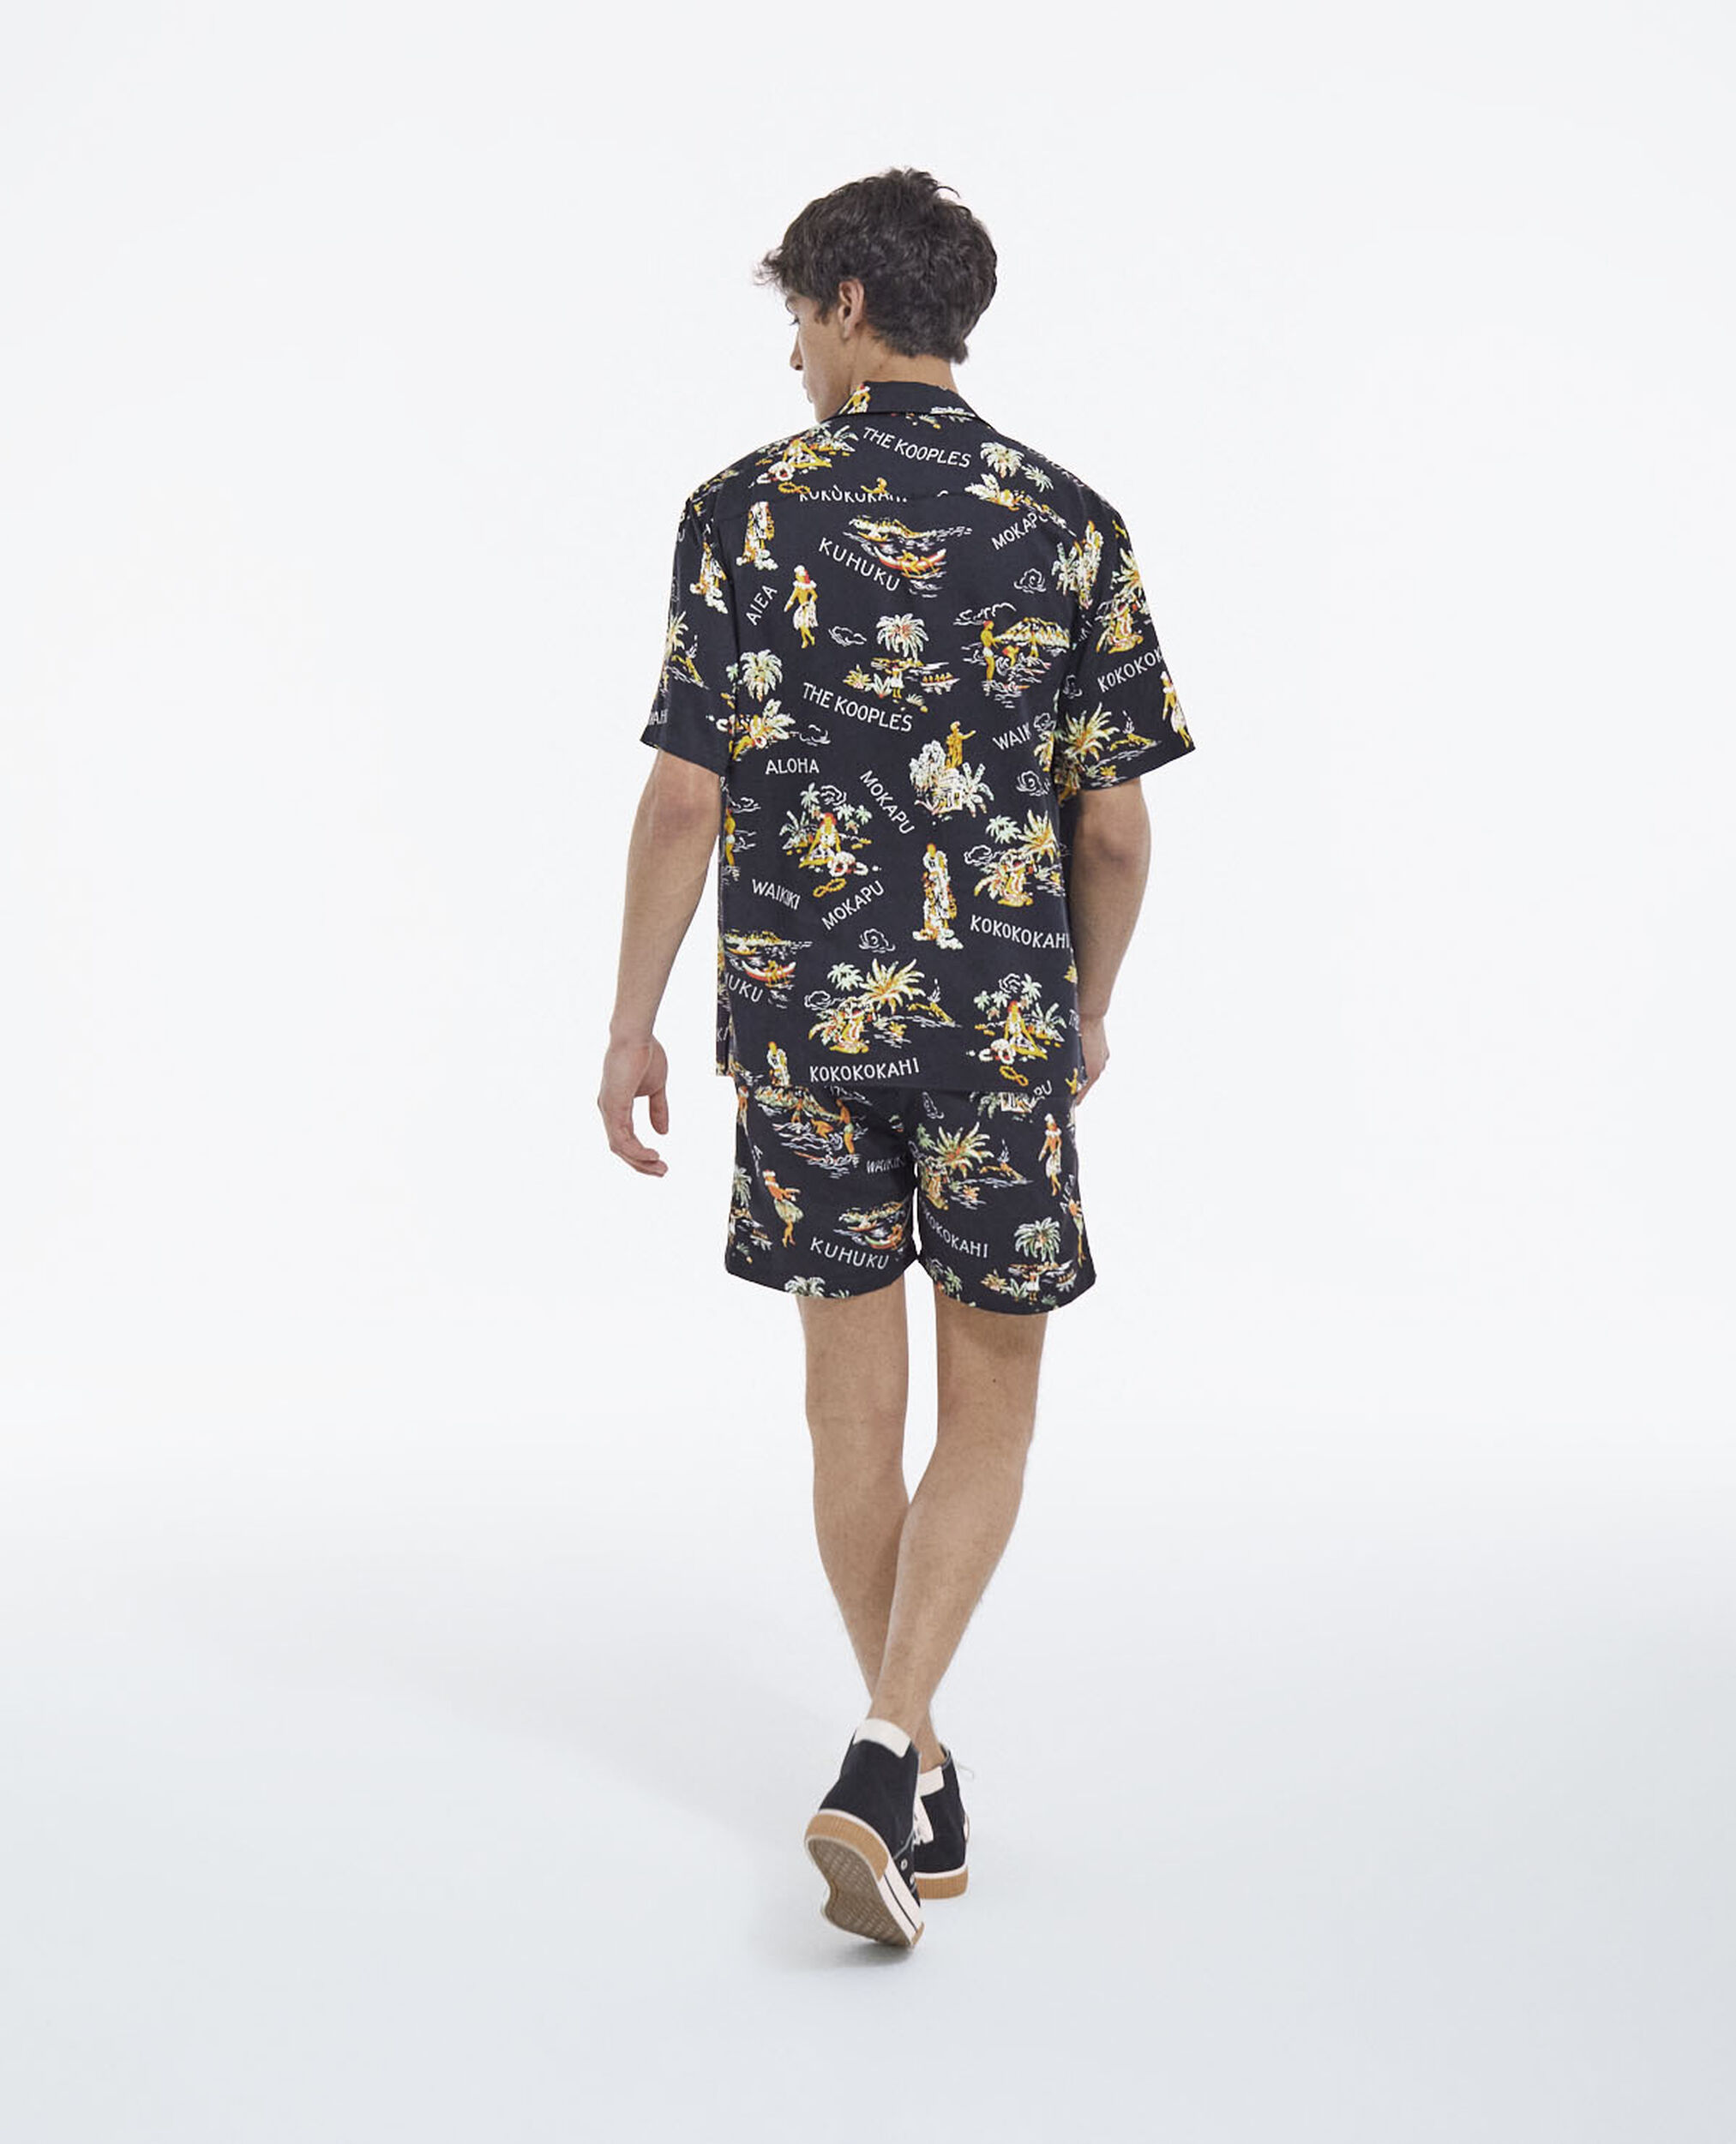 Men’s black shirt with floral print, BLACK / YELLOW, hi-res image number null